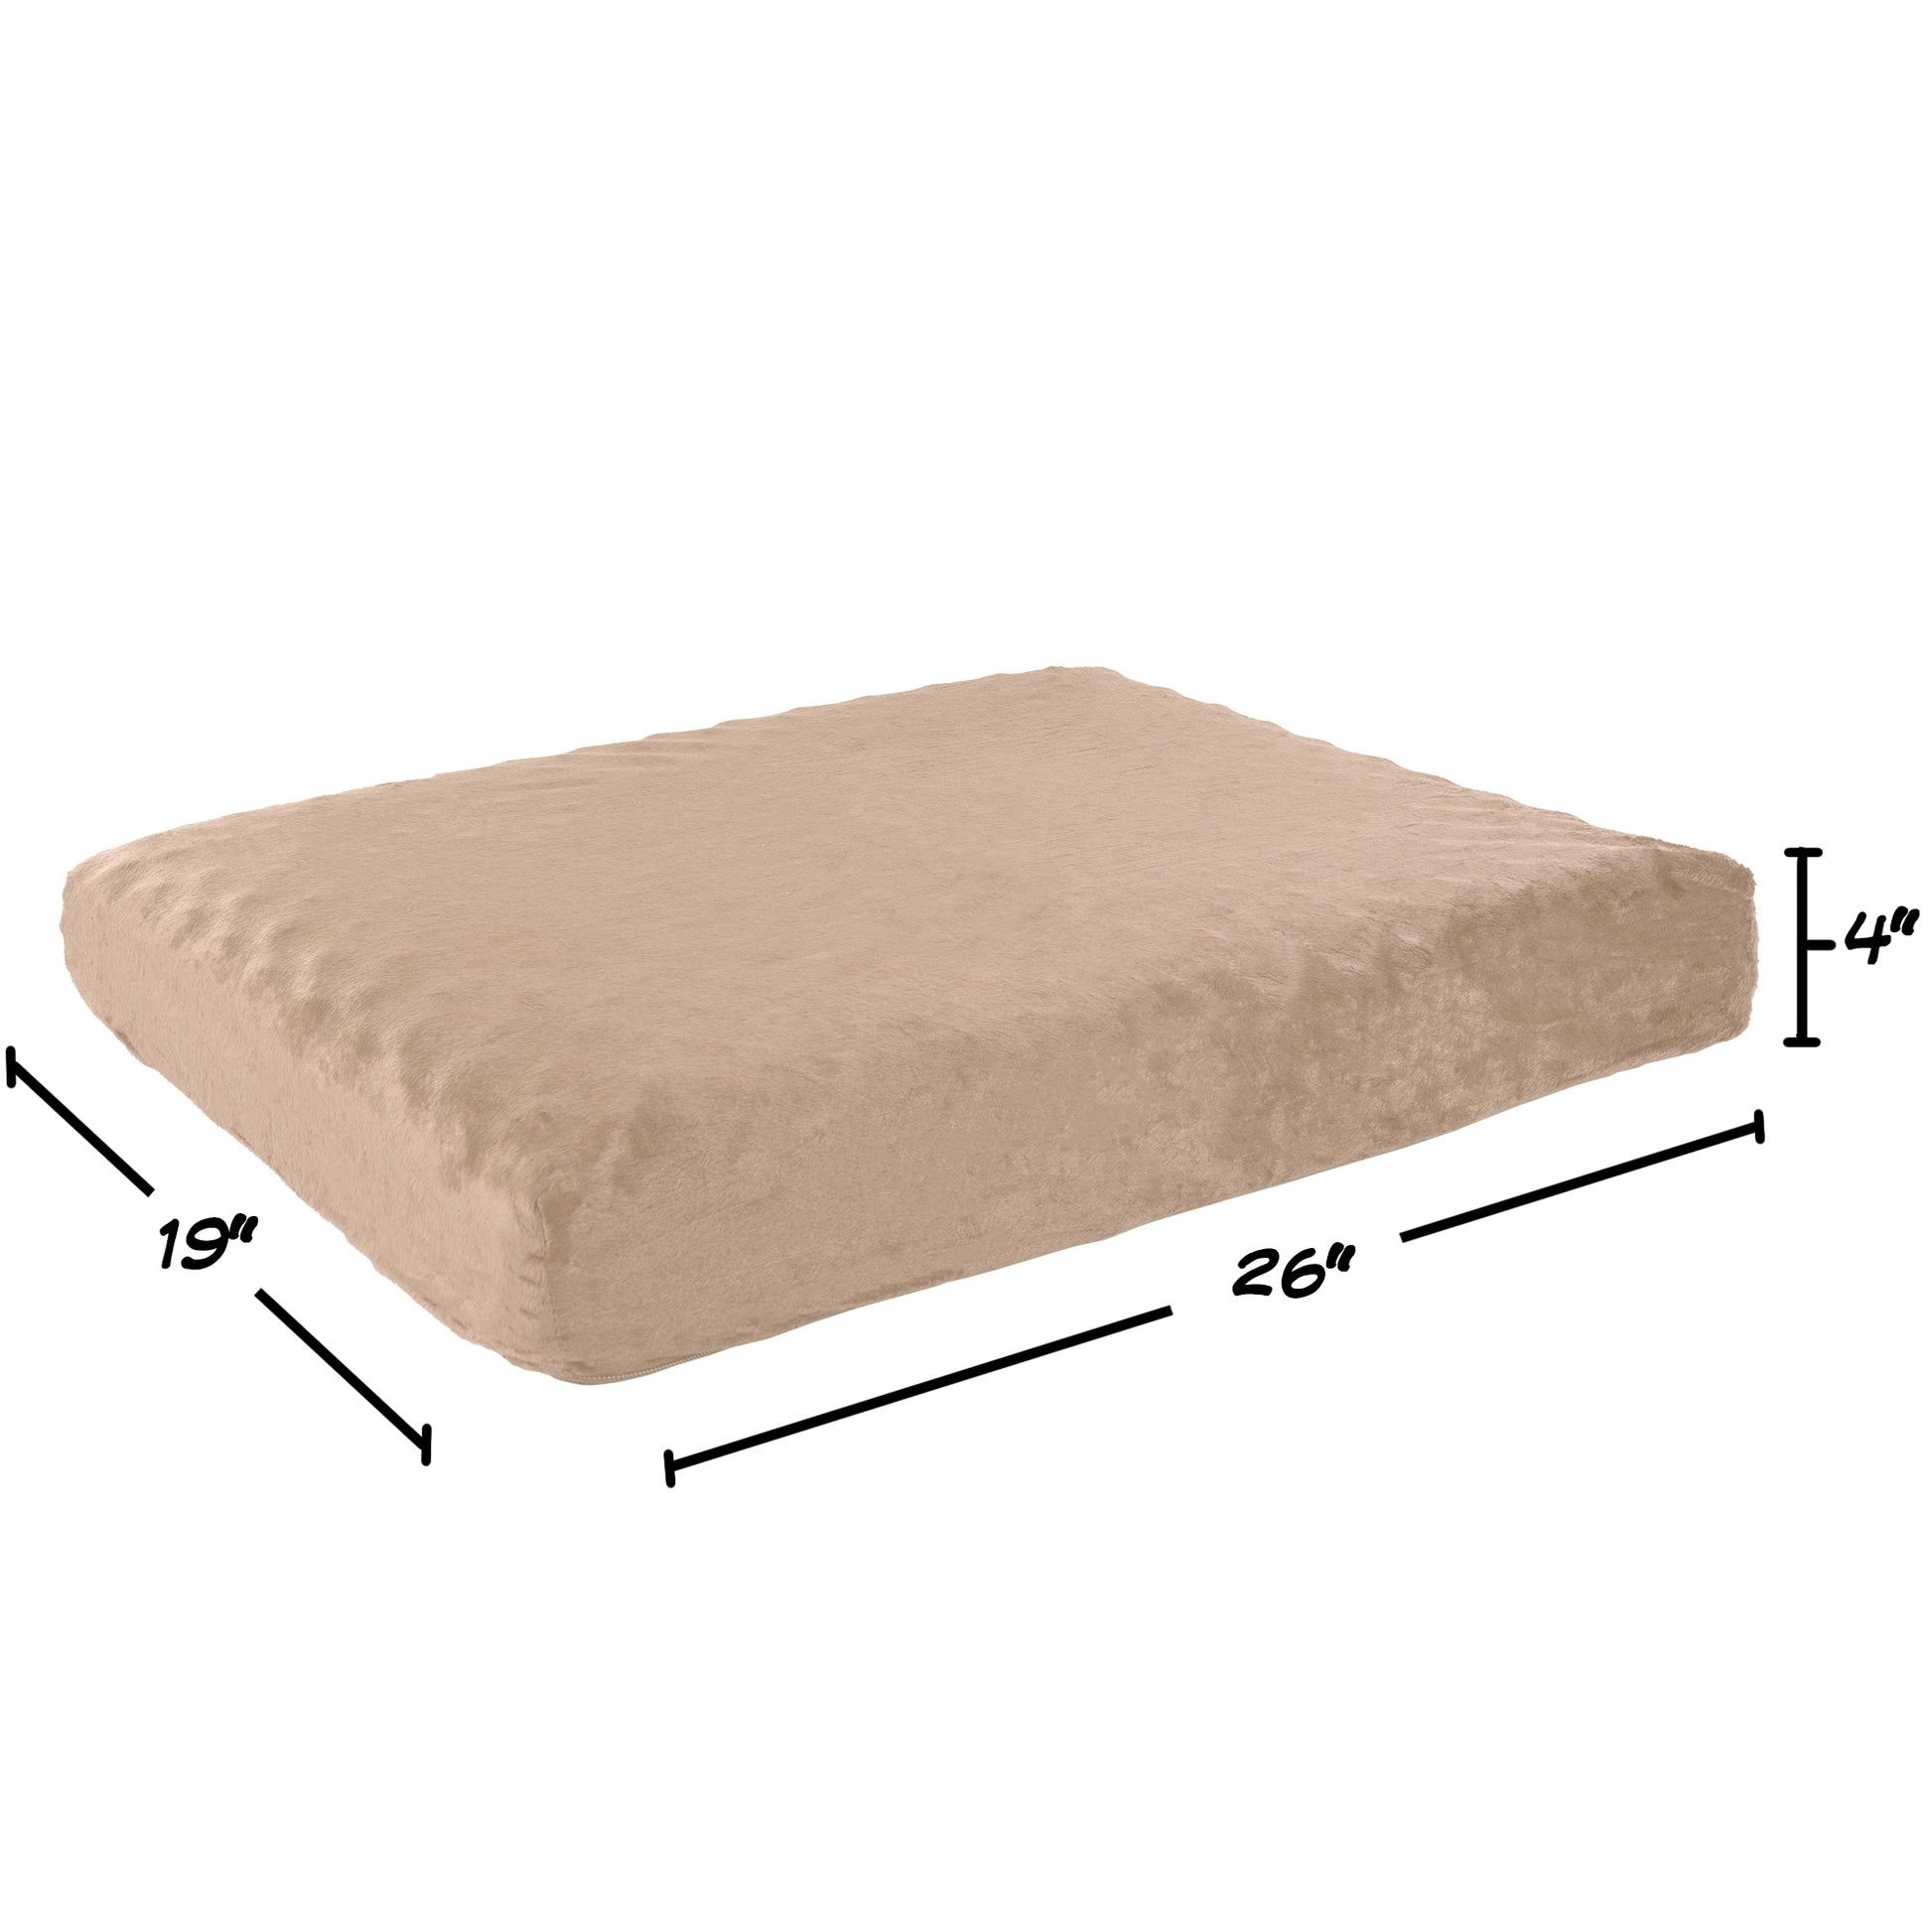 Orthopedic Dog Bed - 2-Layer Memory Foam Crate Mat with Machine Washable  Sherpa Cover - 30x20.5 Pet Bed for Medium Dogs Up to 45lbs by PETMAKER (Tan)